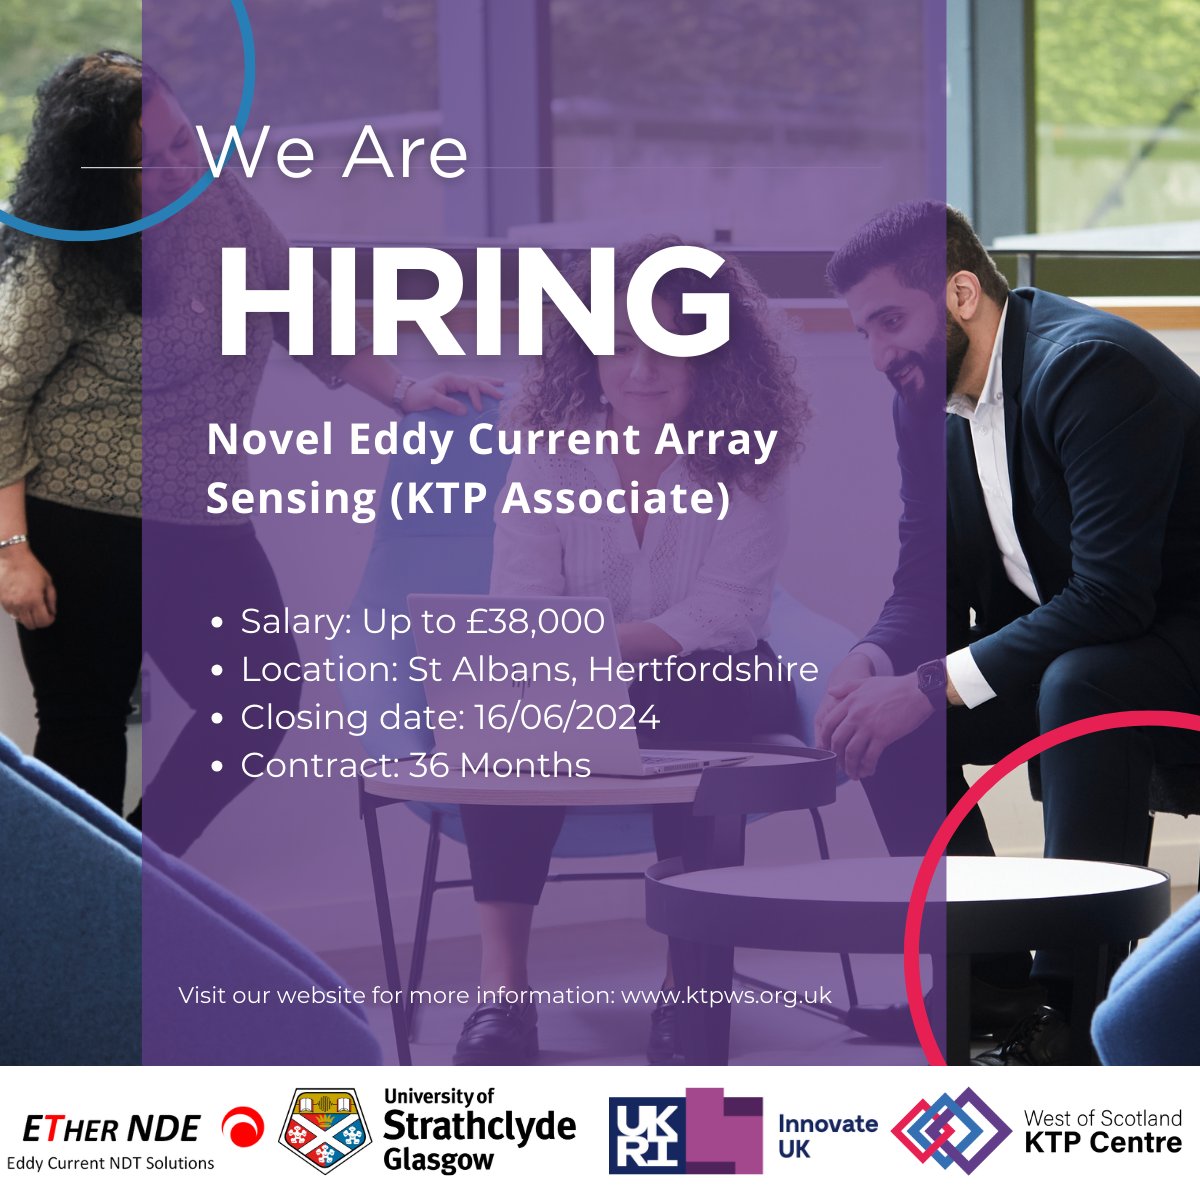 #Vacany We have an exciting opportunity for a #KTP Associate to work on a 36 month project in collaboration with @ETherNDE and @UniStrathclyde. More info: ktpws.org.uk/Graduates @innovateuk | @IUK_Connect | @IUK_KTP | @EEEStrathclyde